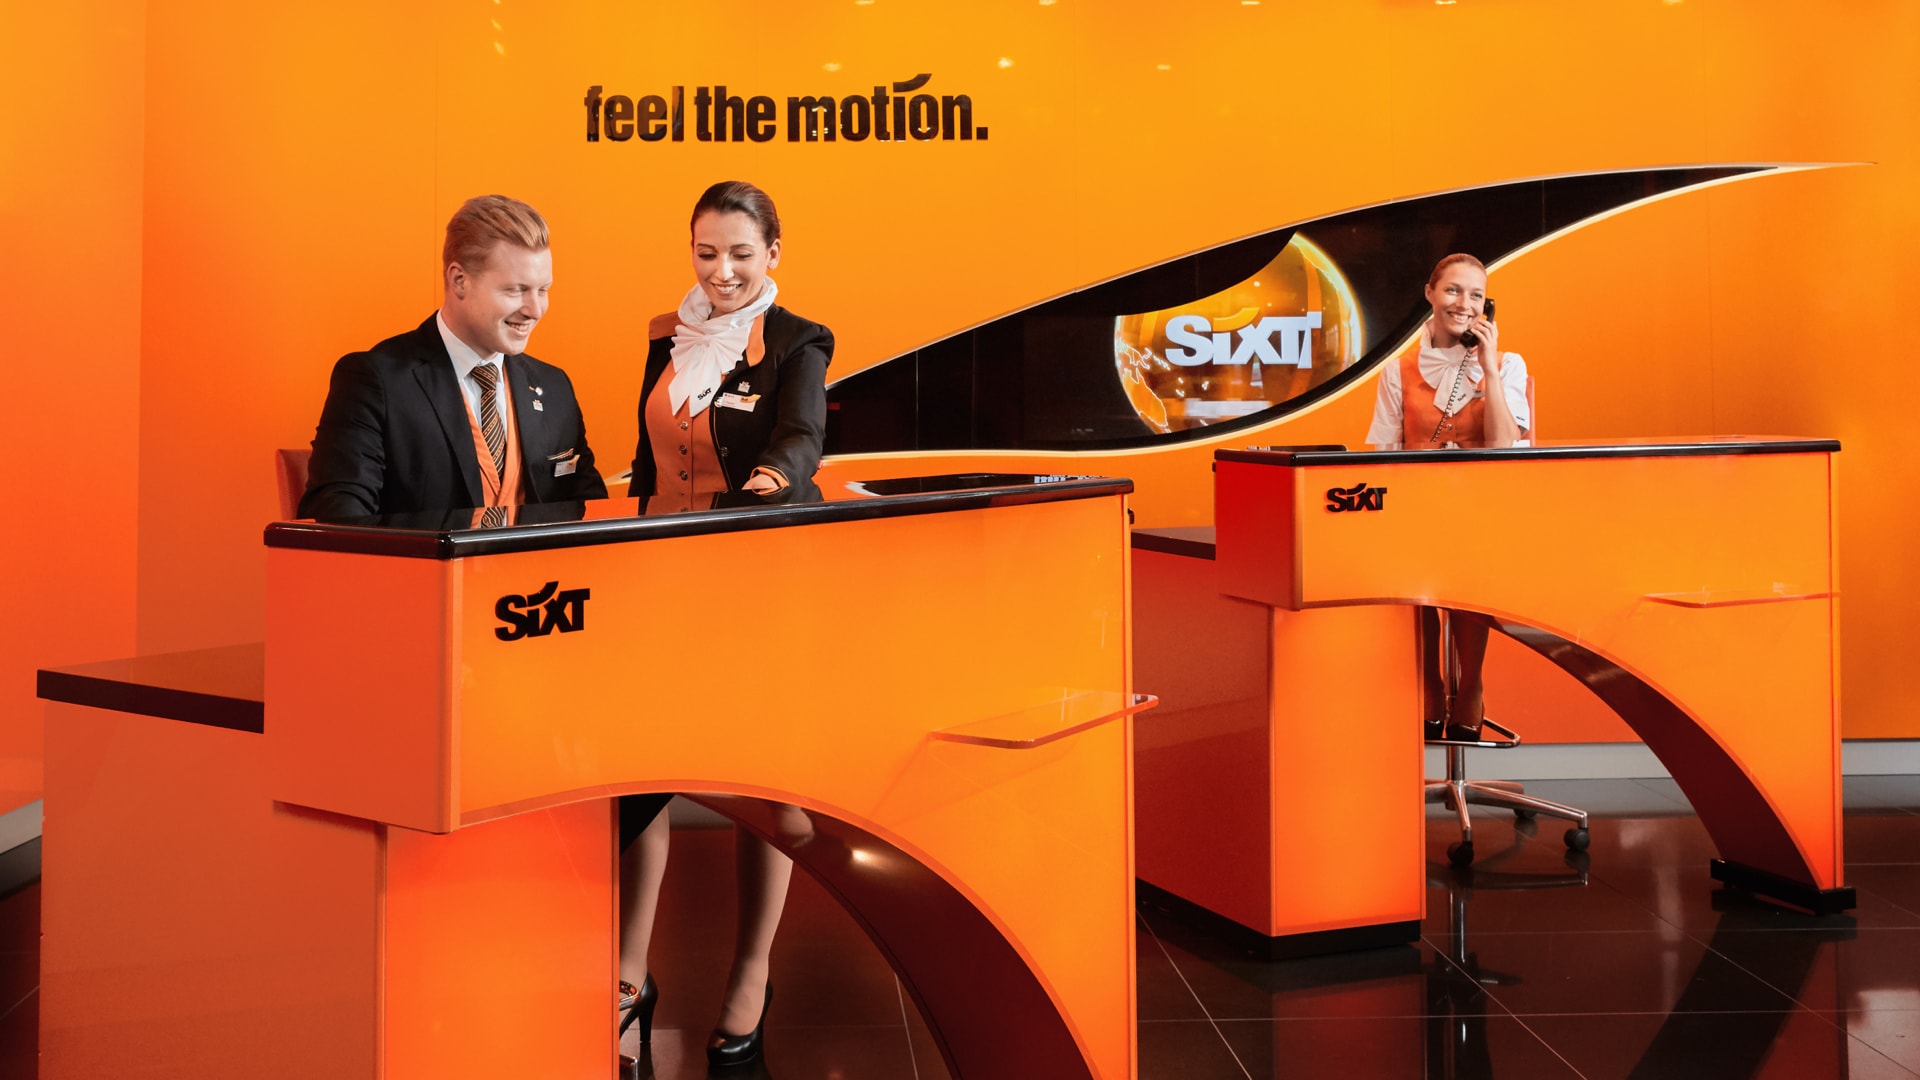 Three Sixt employees dressed in black and orange business attire work in front of an orange wall with "feel the motion" written on the wall in black.